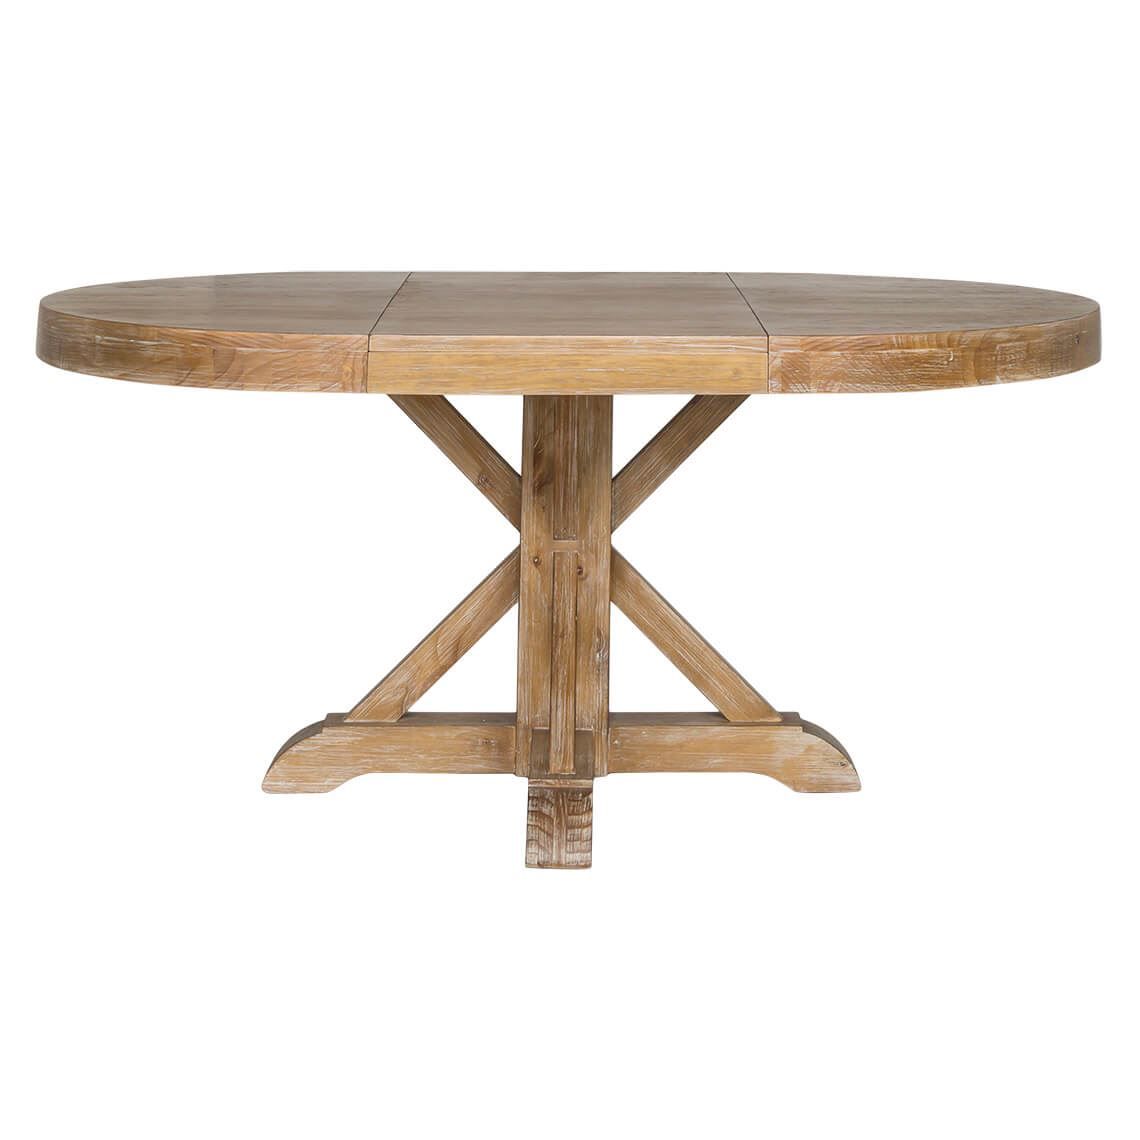 Thorne Extension Dining Table, Natural In 2019 | Extension Throughout Most Popular Hart Reclaimed Extending Dining Tables (View 19 of 25)